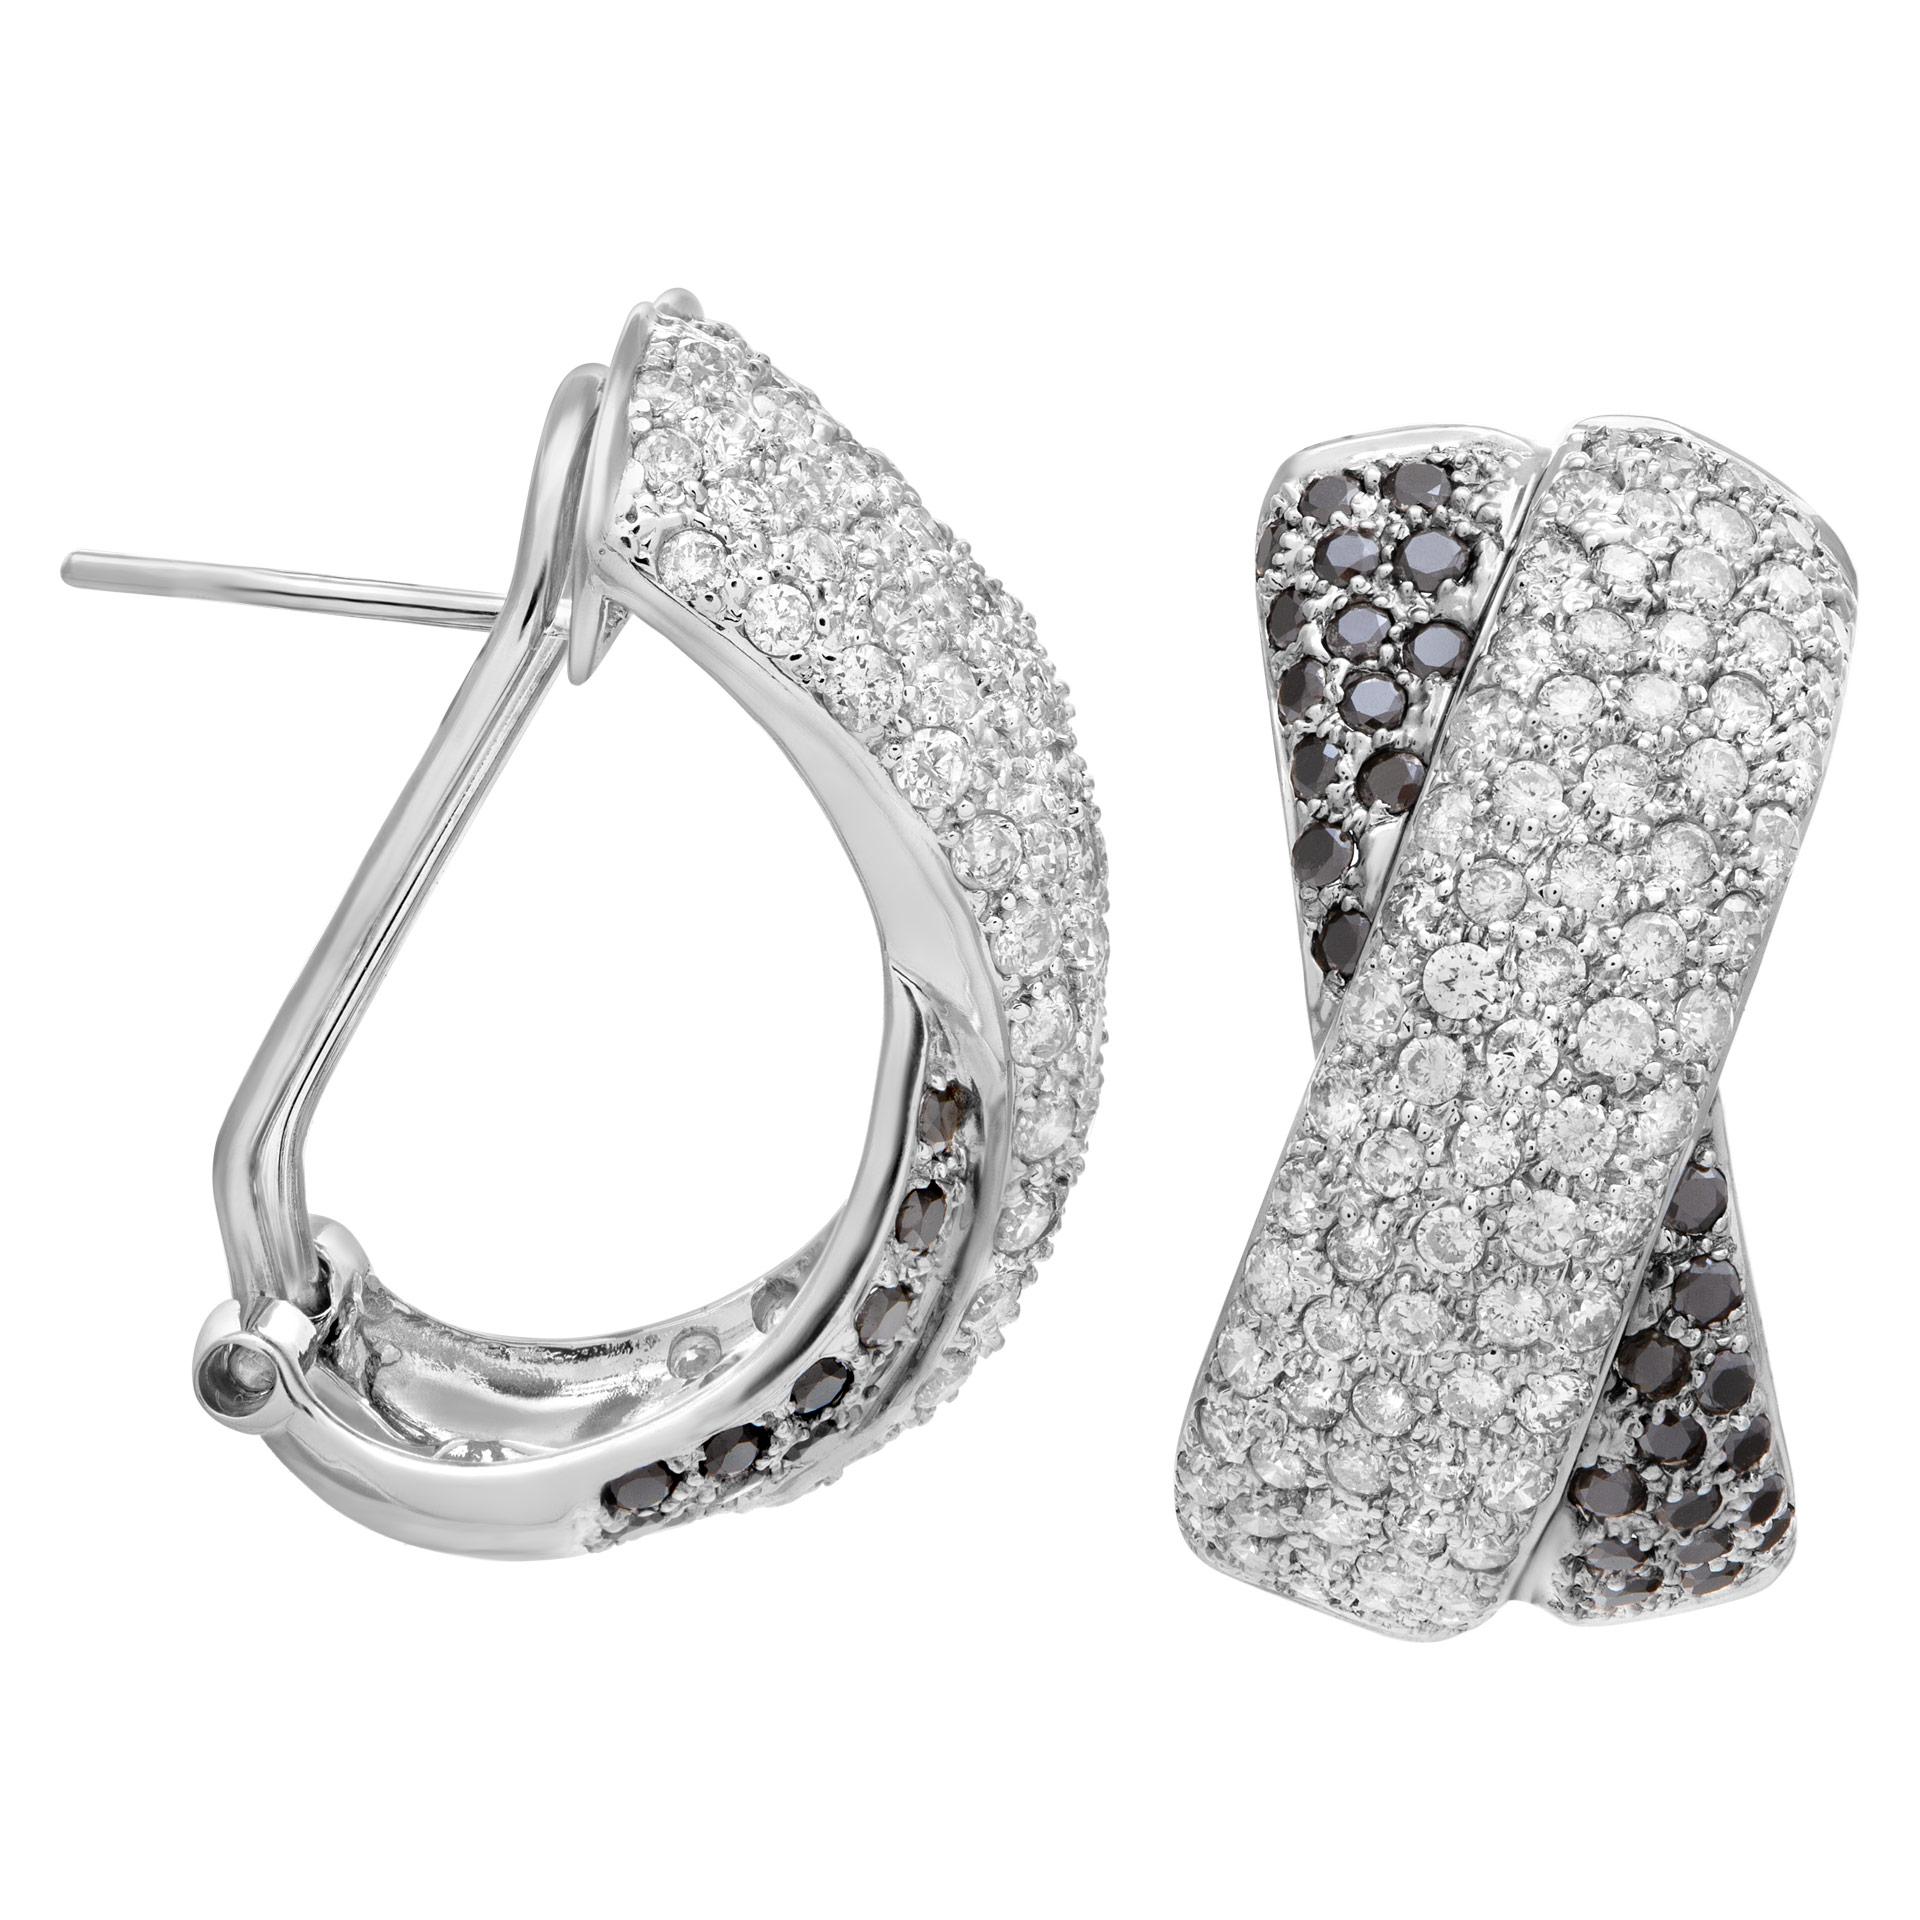 Black and White Diamond Earring X Kisses 14k White Gold In Excellent Condition For Sale In Surfside, FL